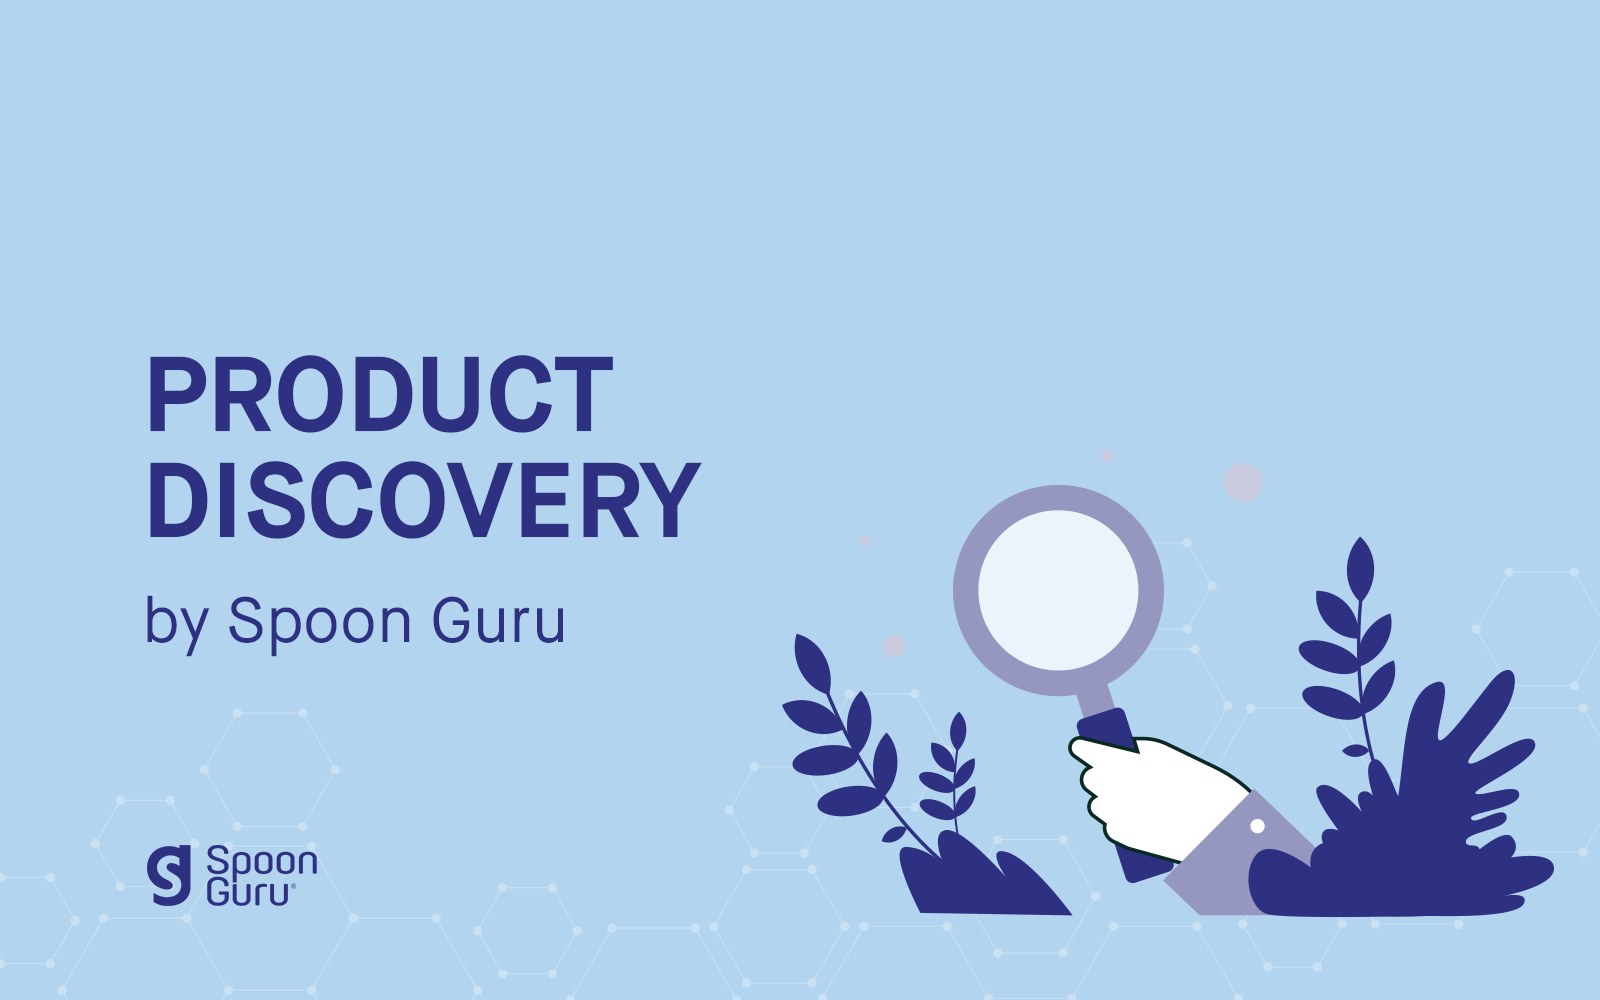 Product Discovery by Spoon Guru